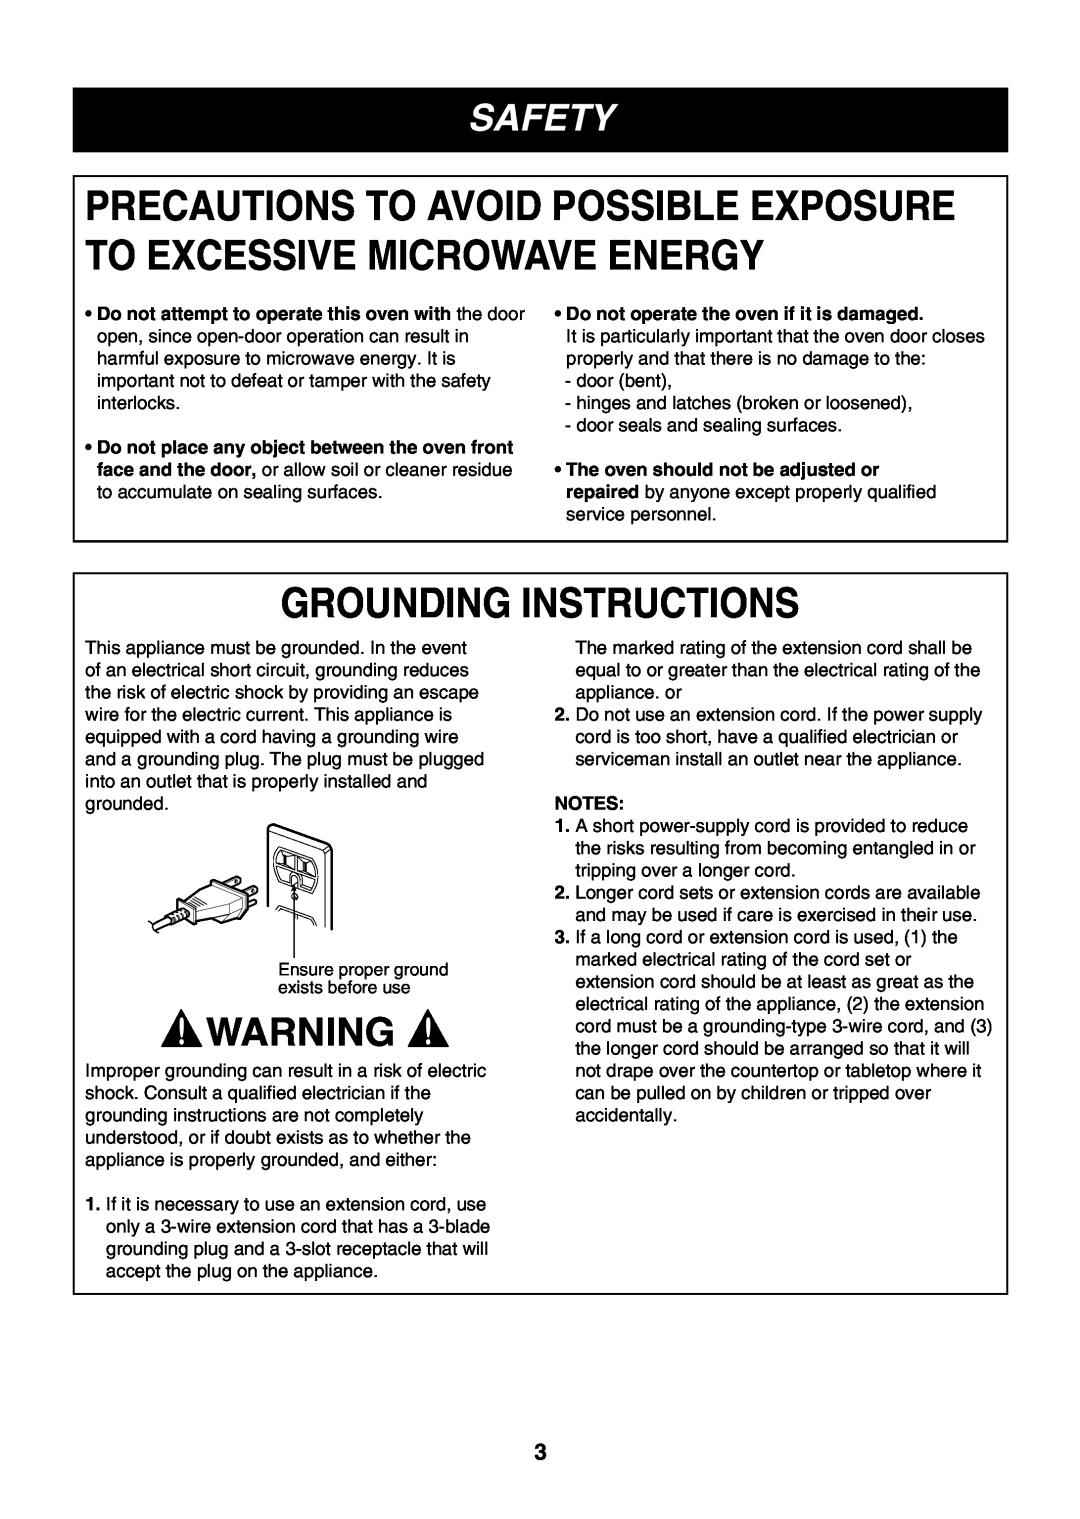 LG Electronics LMH1017CVB, LMH1017CVST, LMH1017CVW Grounding Instructions, Safety, Do not operate the oven if it is damaged 